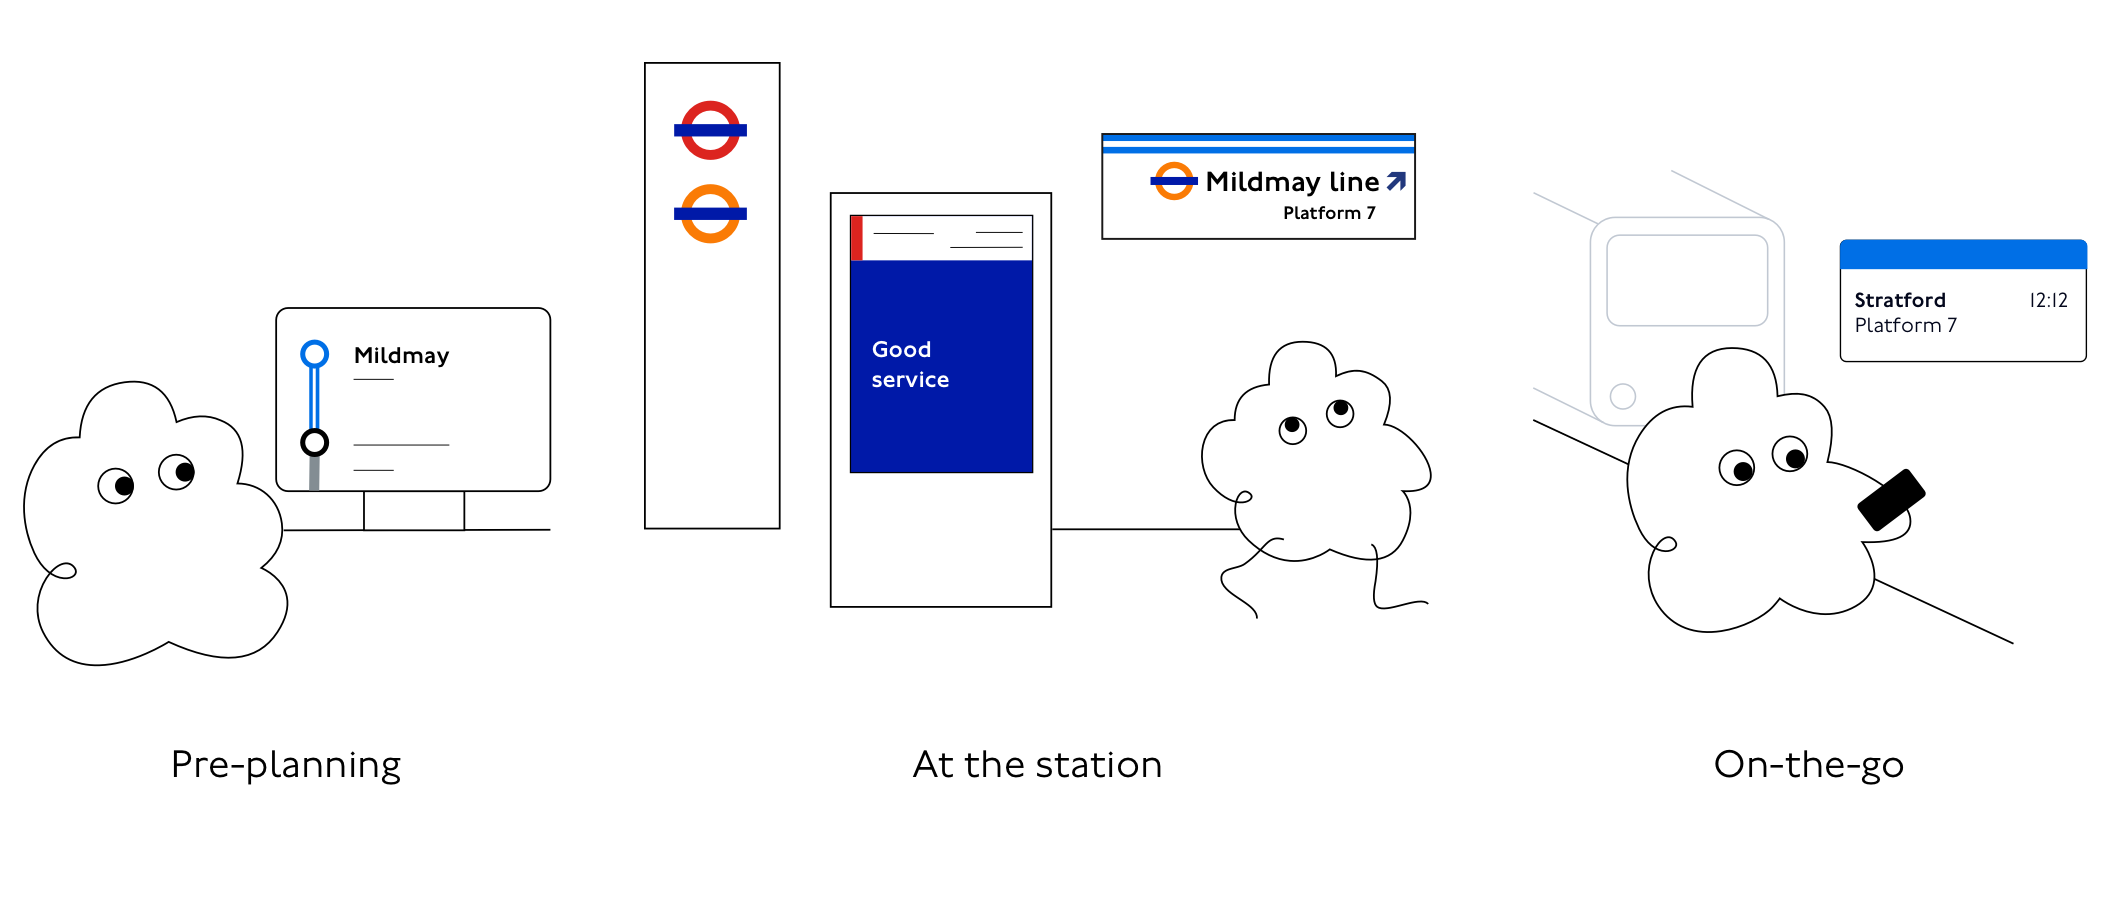 A sequence of illustrations describing three different moments of a customer journey from their home to boarding a London Overground train. The protagonist is a character composed of an abstract shape and expressive eyes. The first scene is titled “At home”, and depicts the character looking at a diagram of an itinerary, including the colour of the Mildmay line (blue), on a desktop screen. The second scene is title “At the station”, and depicts the character walking in a station environment including the London Overground logo and a directional sign to the Mildmay line including its blue colour. The third scene is titled “On-the-go”, and depicts the character on a train platform, looking at a phone. A floating UI card describes train departure information and includes the Mildmay line blue in a colour block.